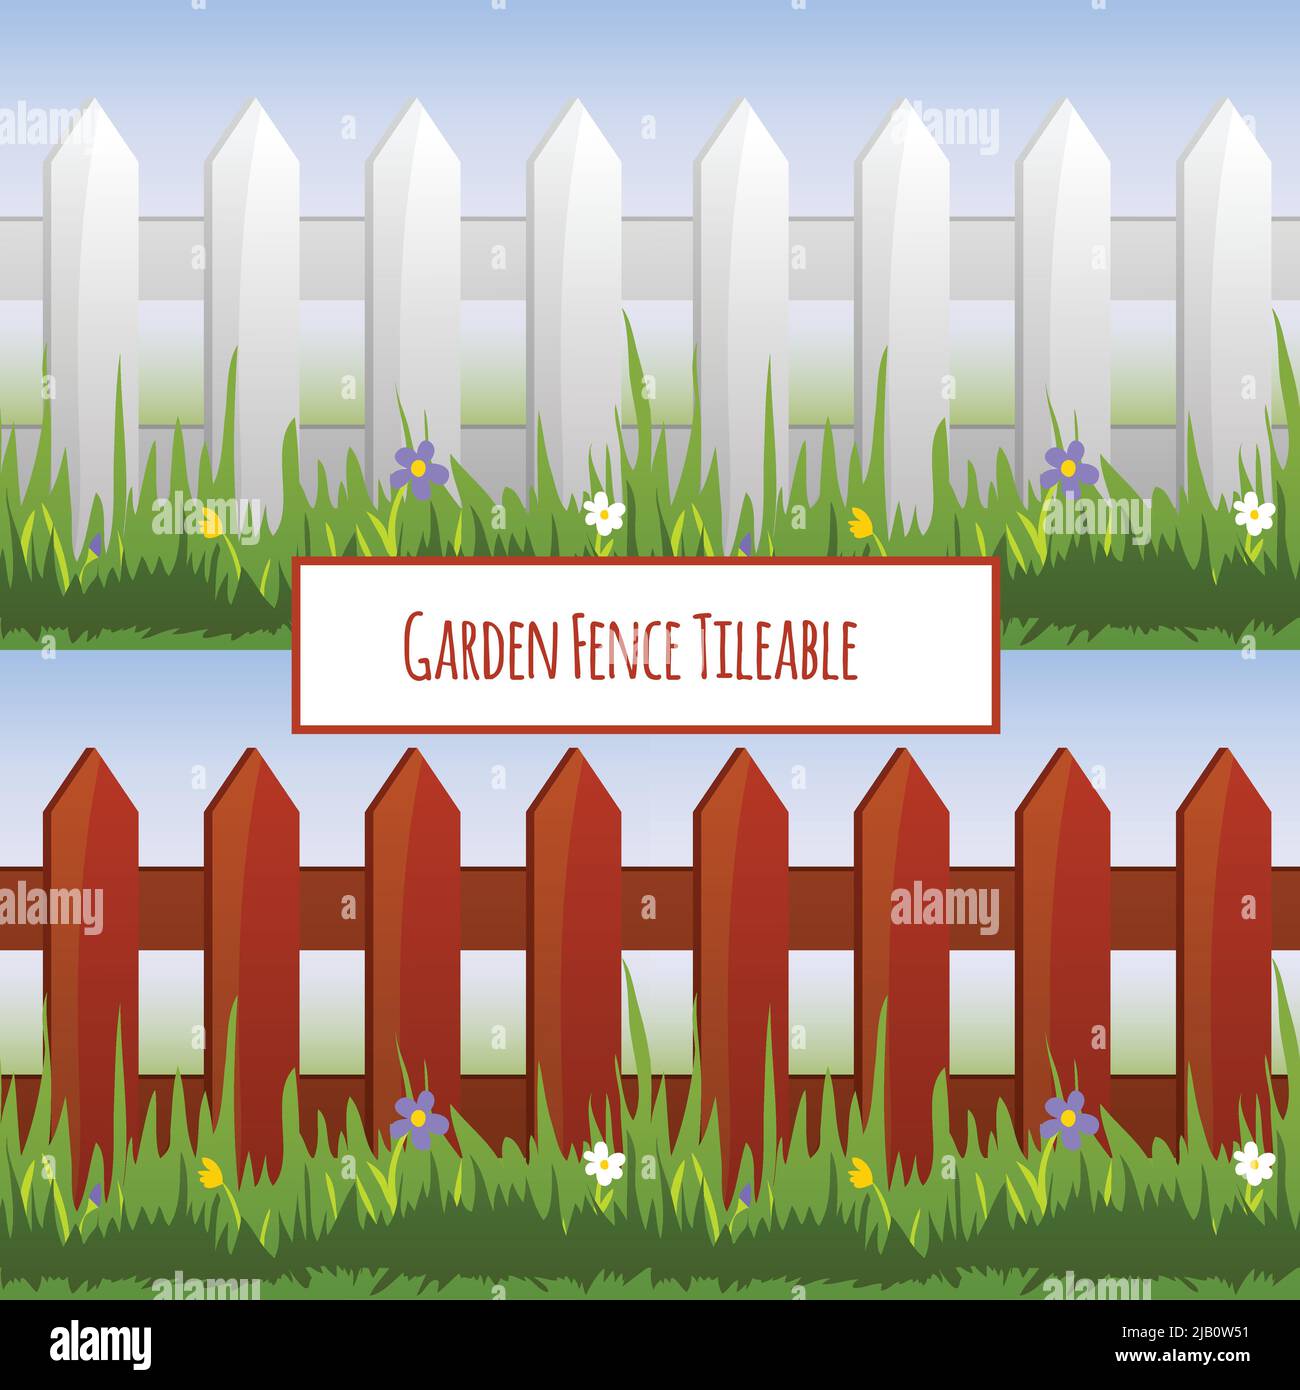 Garden fence with grass and daisy flowers tileable pattern vector illustration Stock Vector